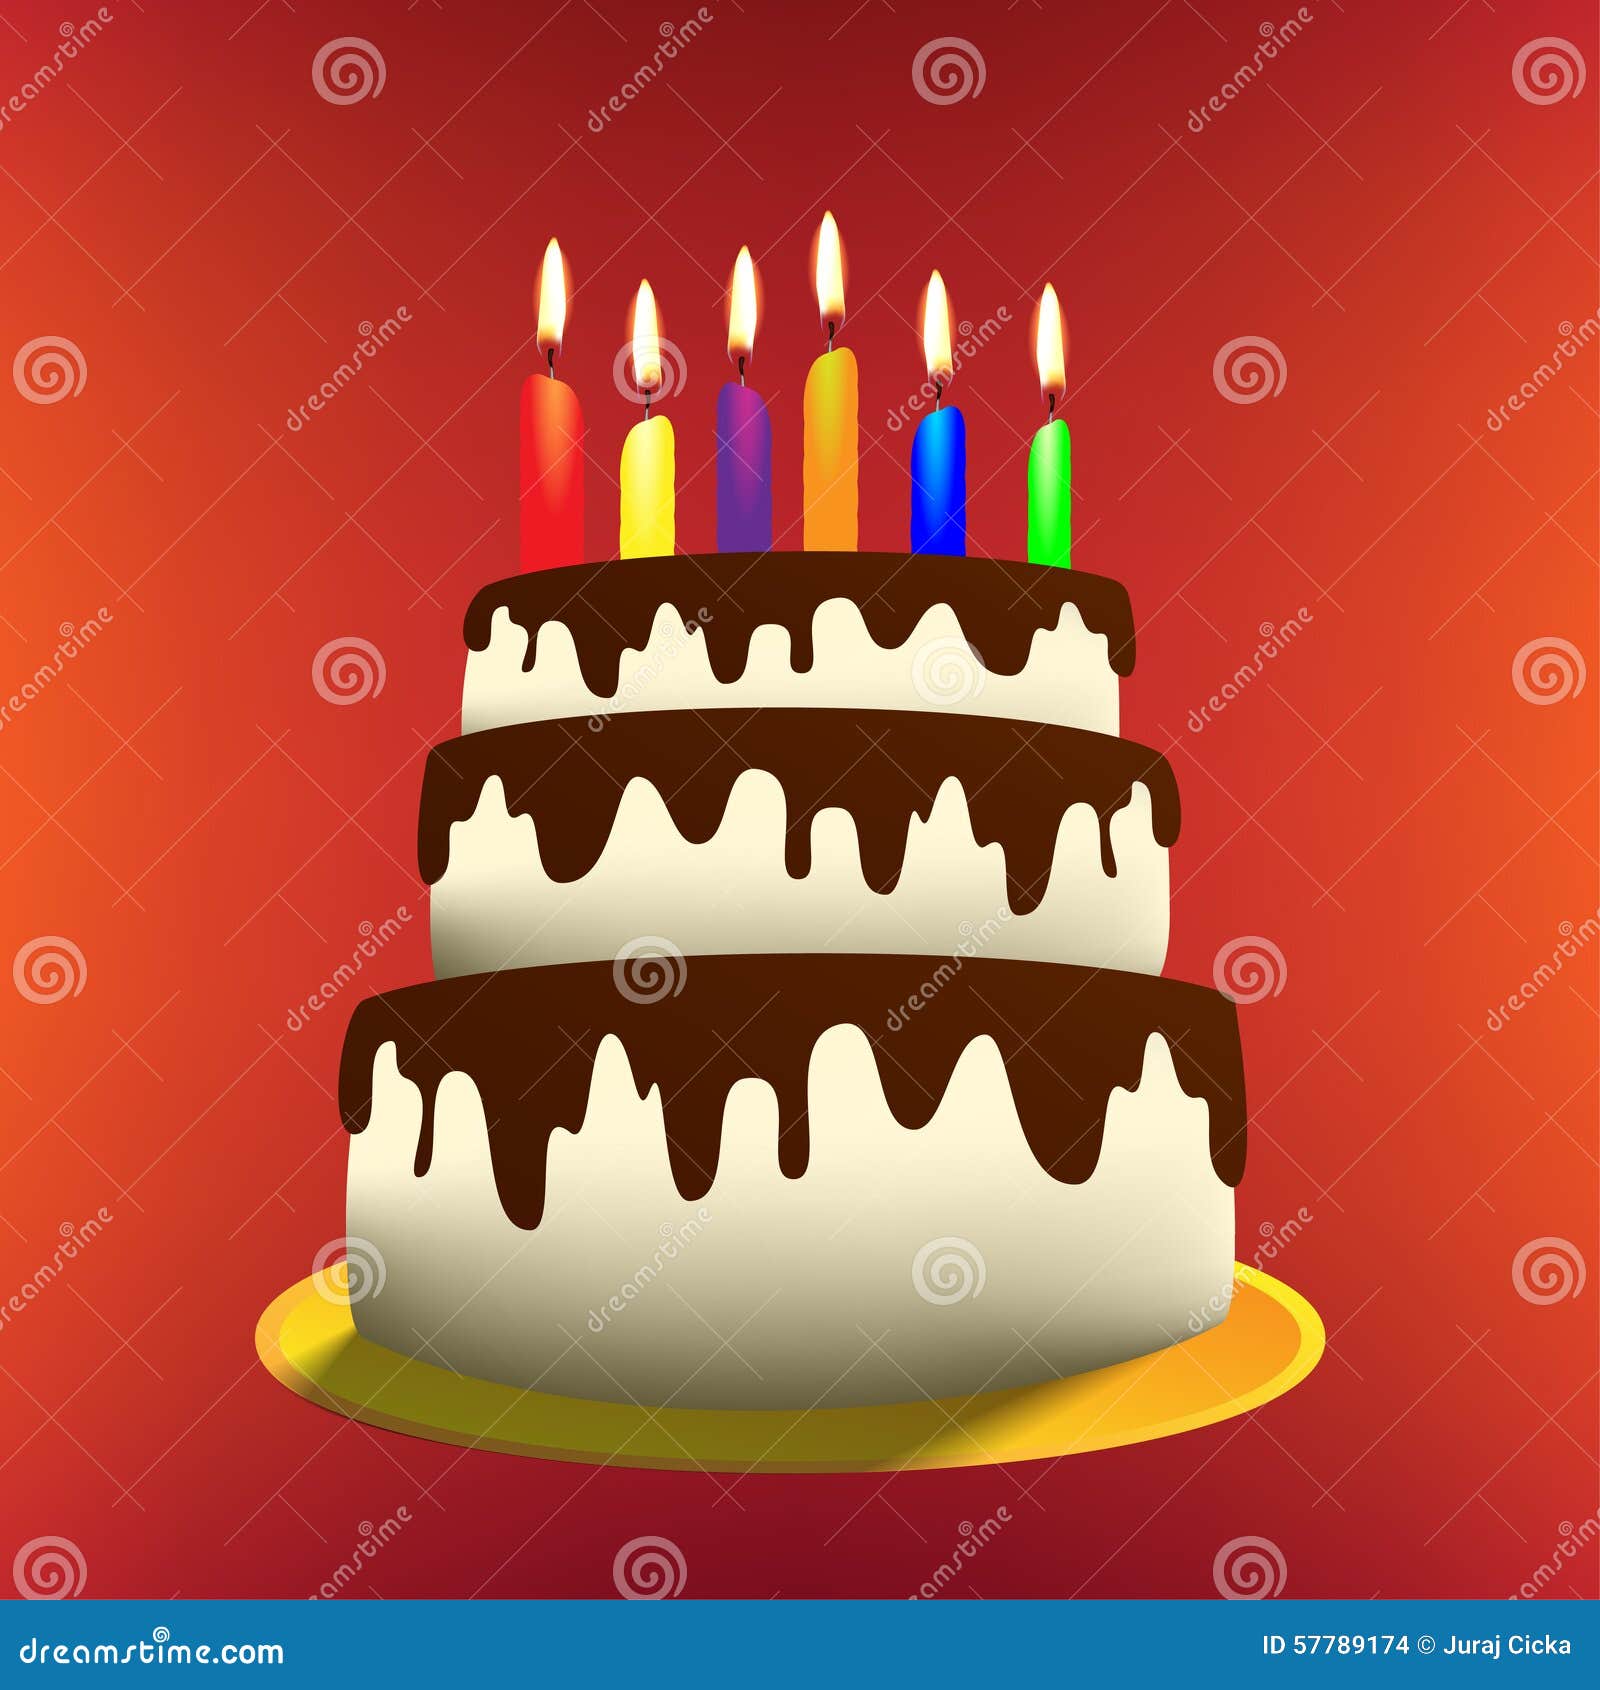 Cartoon cake png images | PNGEgg